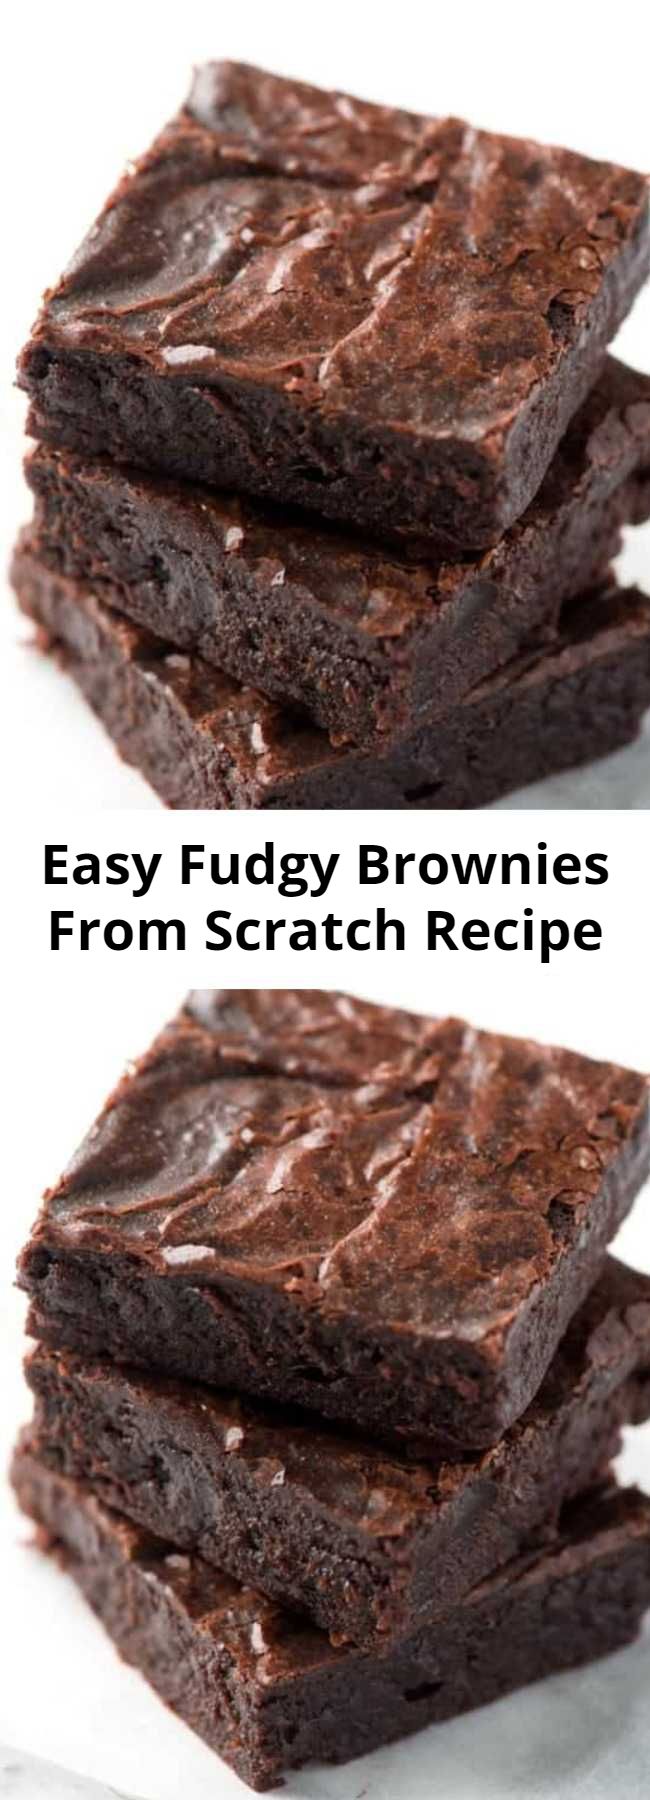 Easy Fudgy Brownies From Scratch Recipe - This is my absolute favorite brownie recipe. They are rich, fudgy in the middle, and made completely from scratch. These brownies are so much better than the box, and I bet you have what you need to make them already sitting in your kitchen.